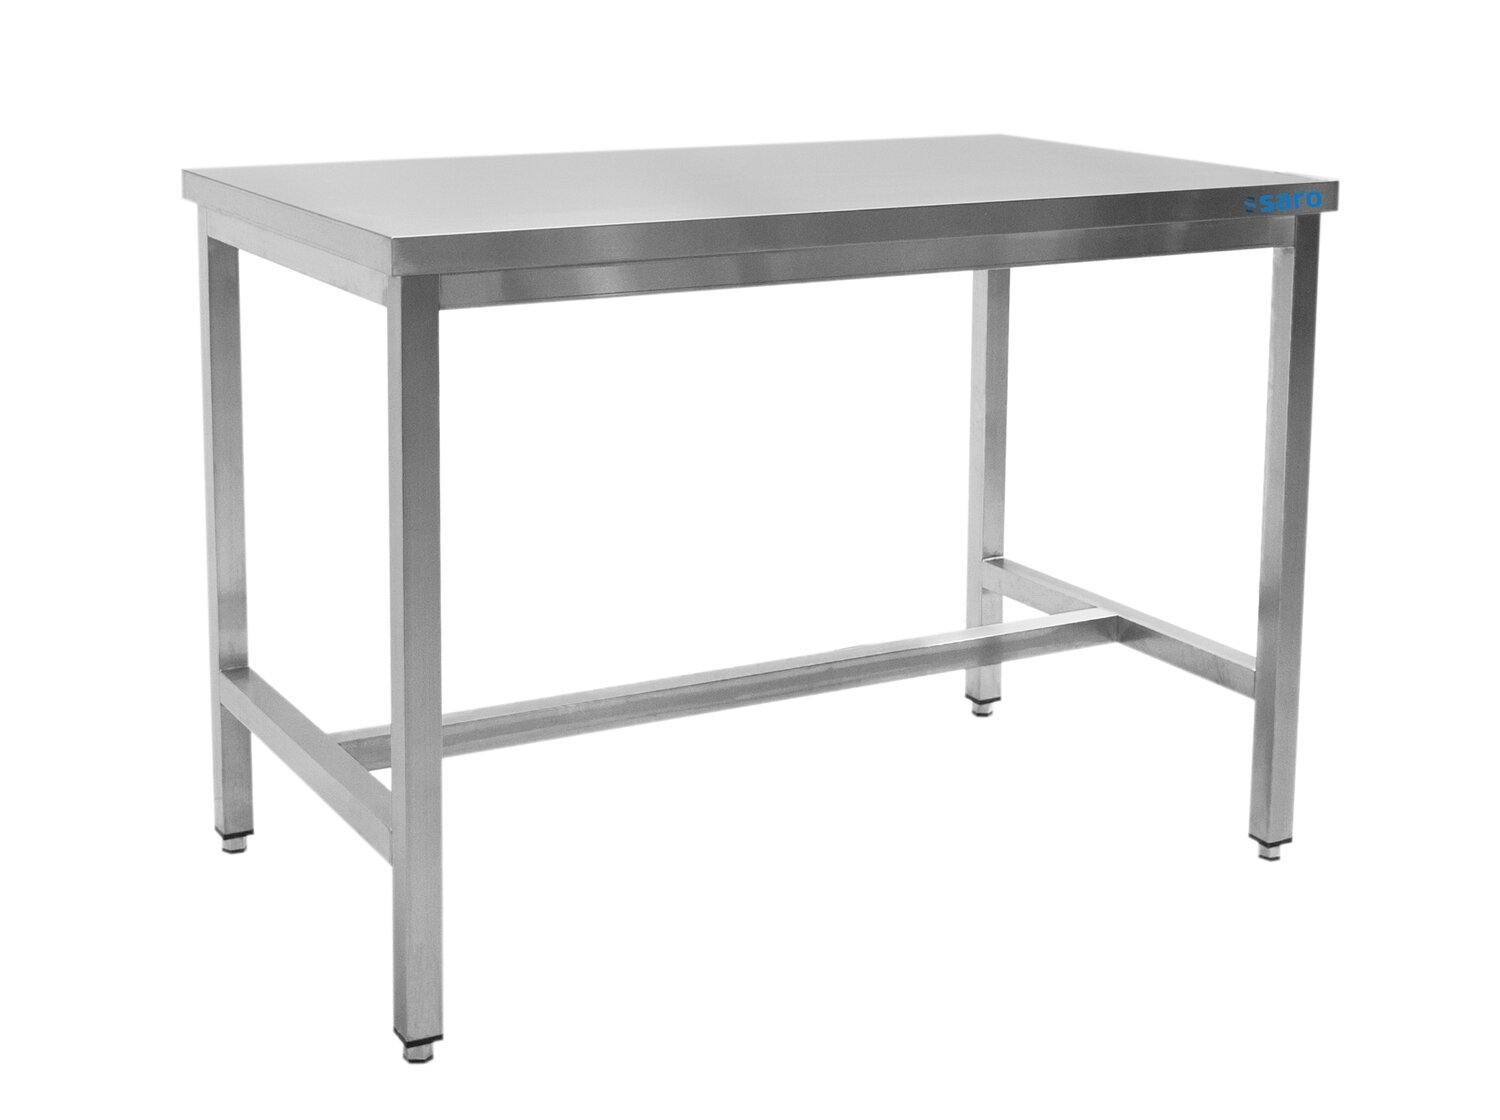 SARO Stainless steel table, without under shelf - 600 mm depth, 1600mm